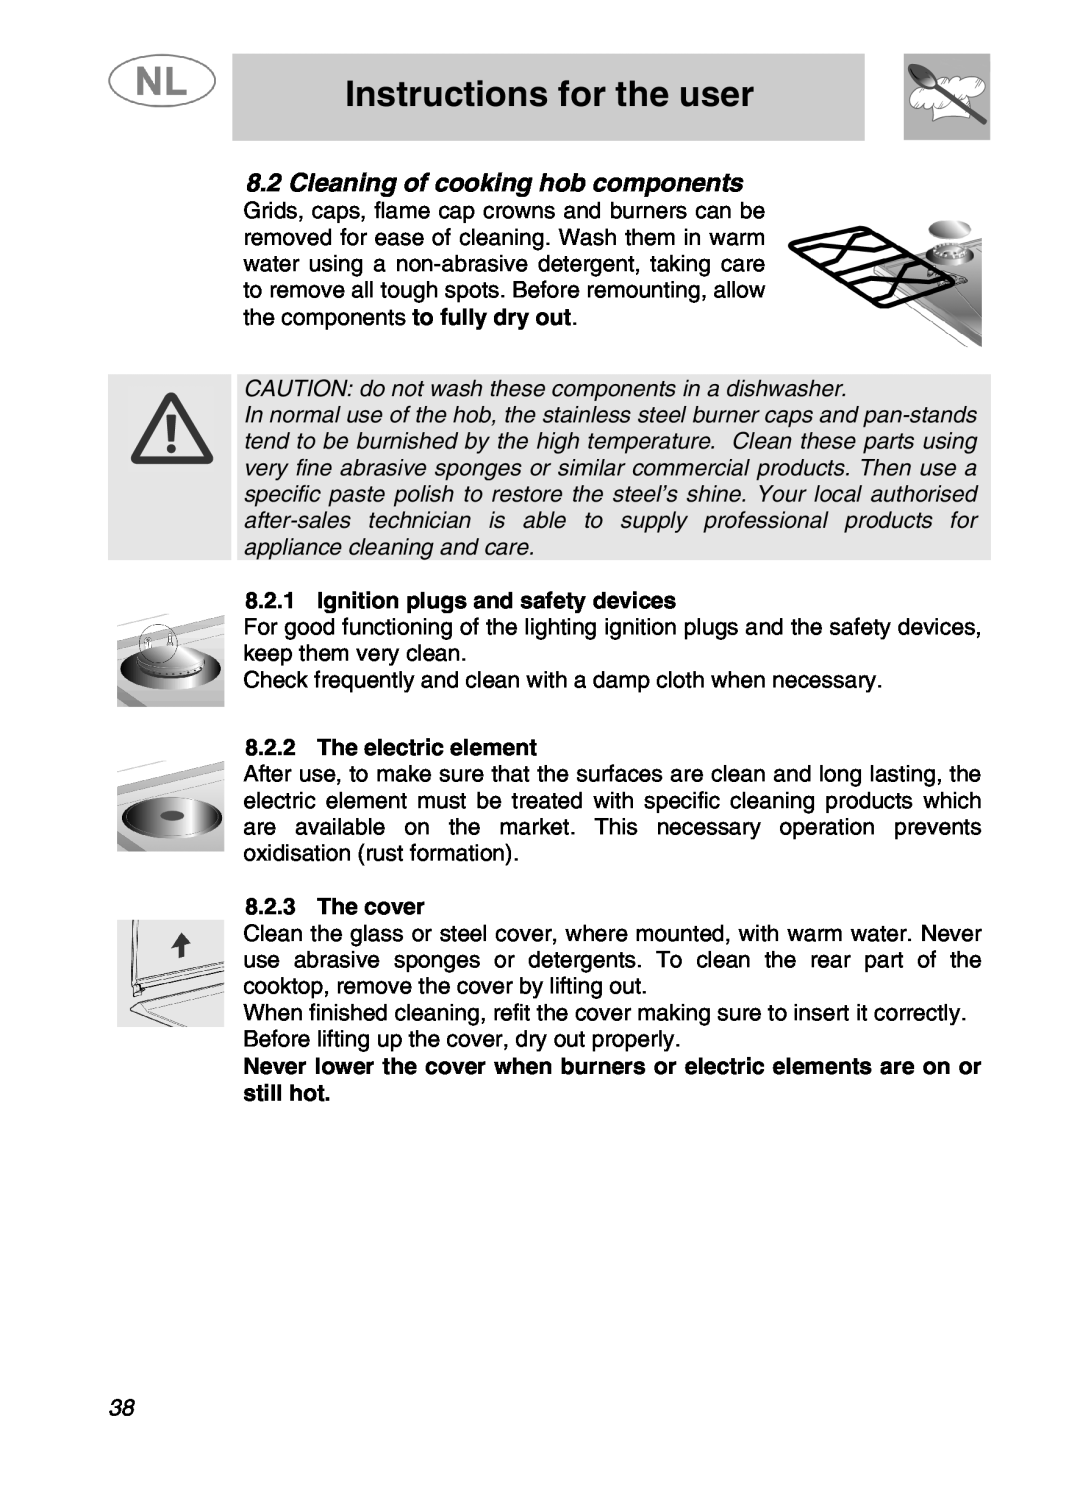 Smeg SLRV596X1 manual 8.2Cleaning of cooking hob components, Instructions for the user, Ignition plugs and safety devices 